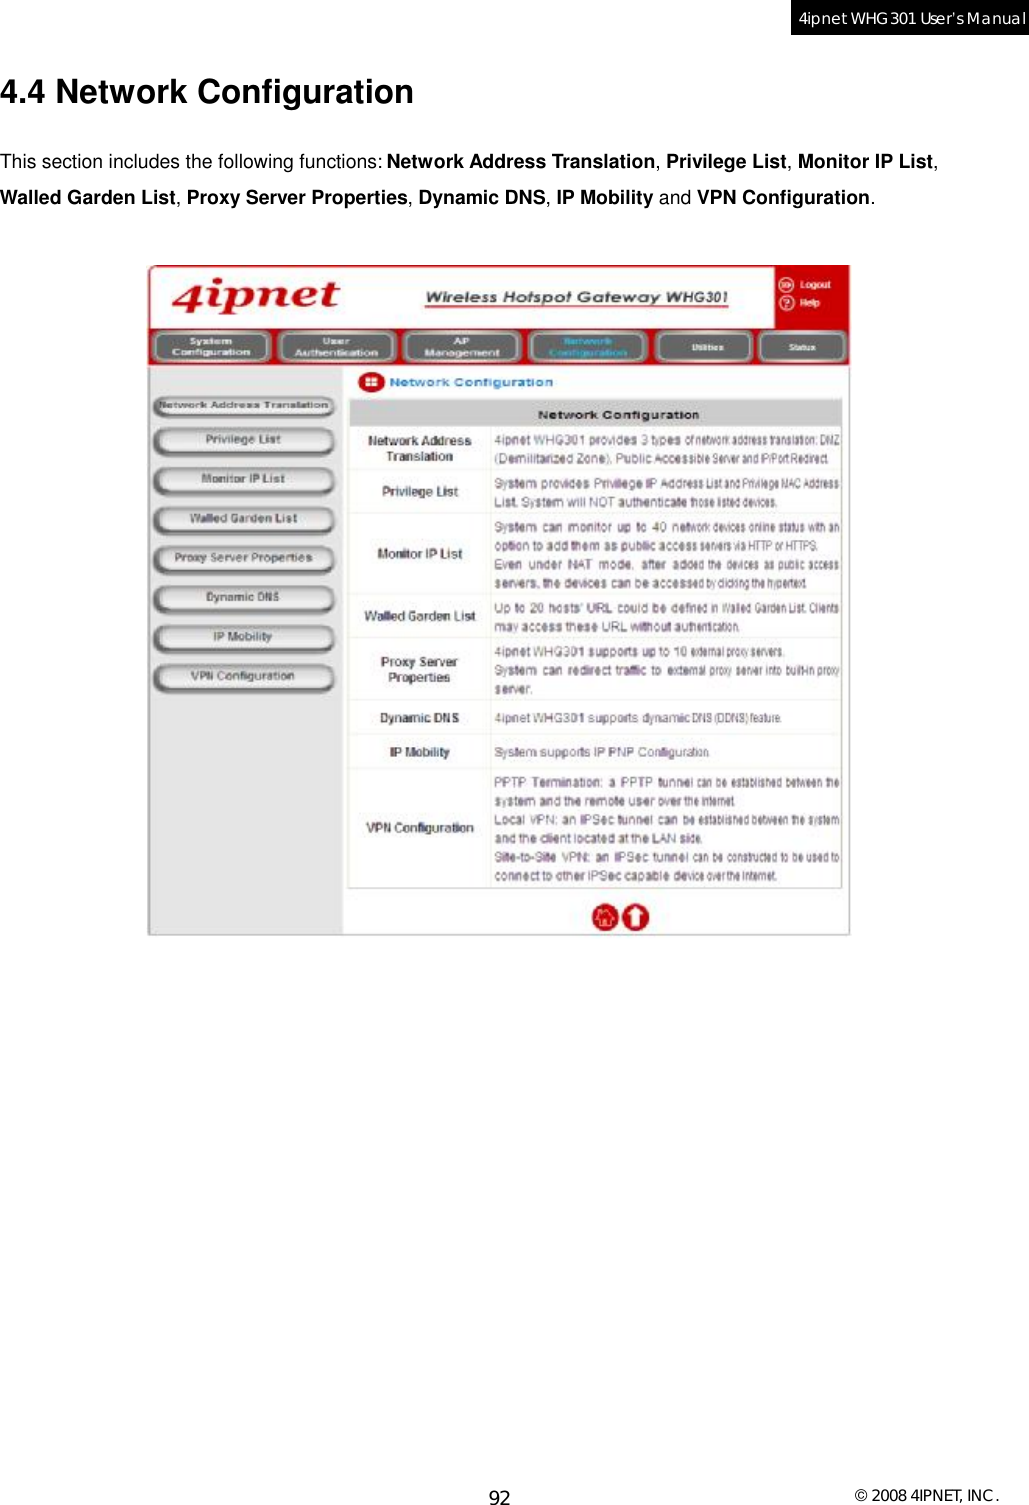  © 2008 4IPNET, INC. 92 4ipnet WHG301 User’s Manual  4.4 Network Configuration This section includes the following functions: Network Address Translation, Privilege List, Monitor IP List, Walled Garden List, Proxy Server Properties, Dynamic DNS, IP Mobility and VPN Configuration.     